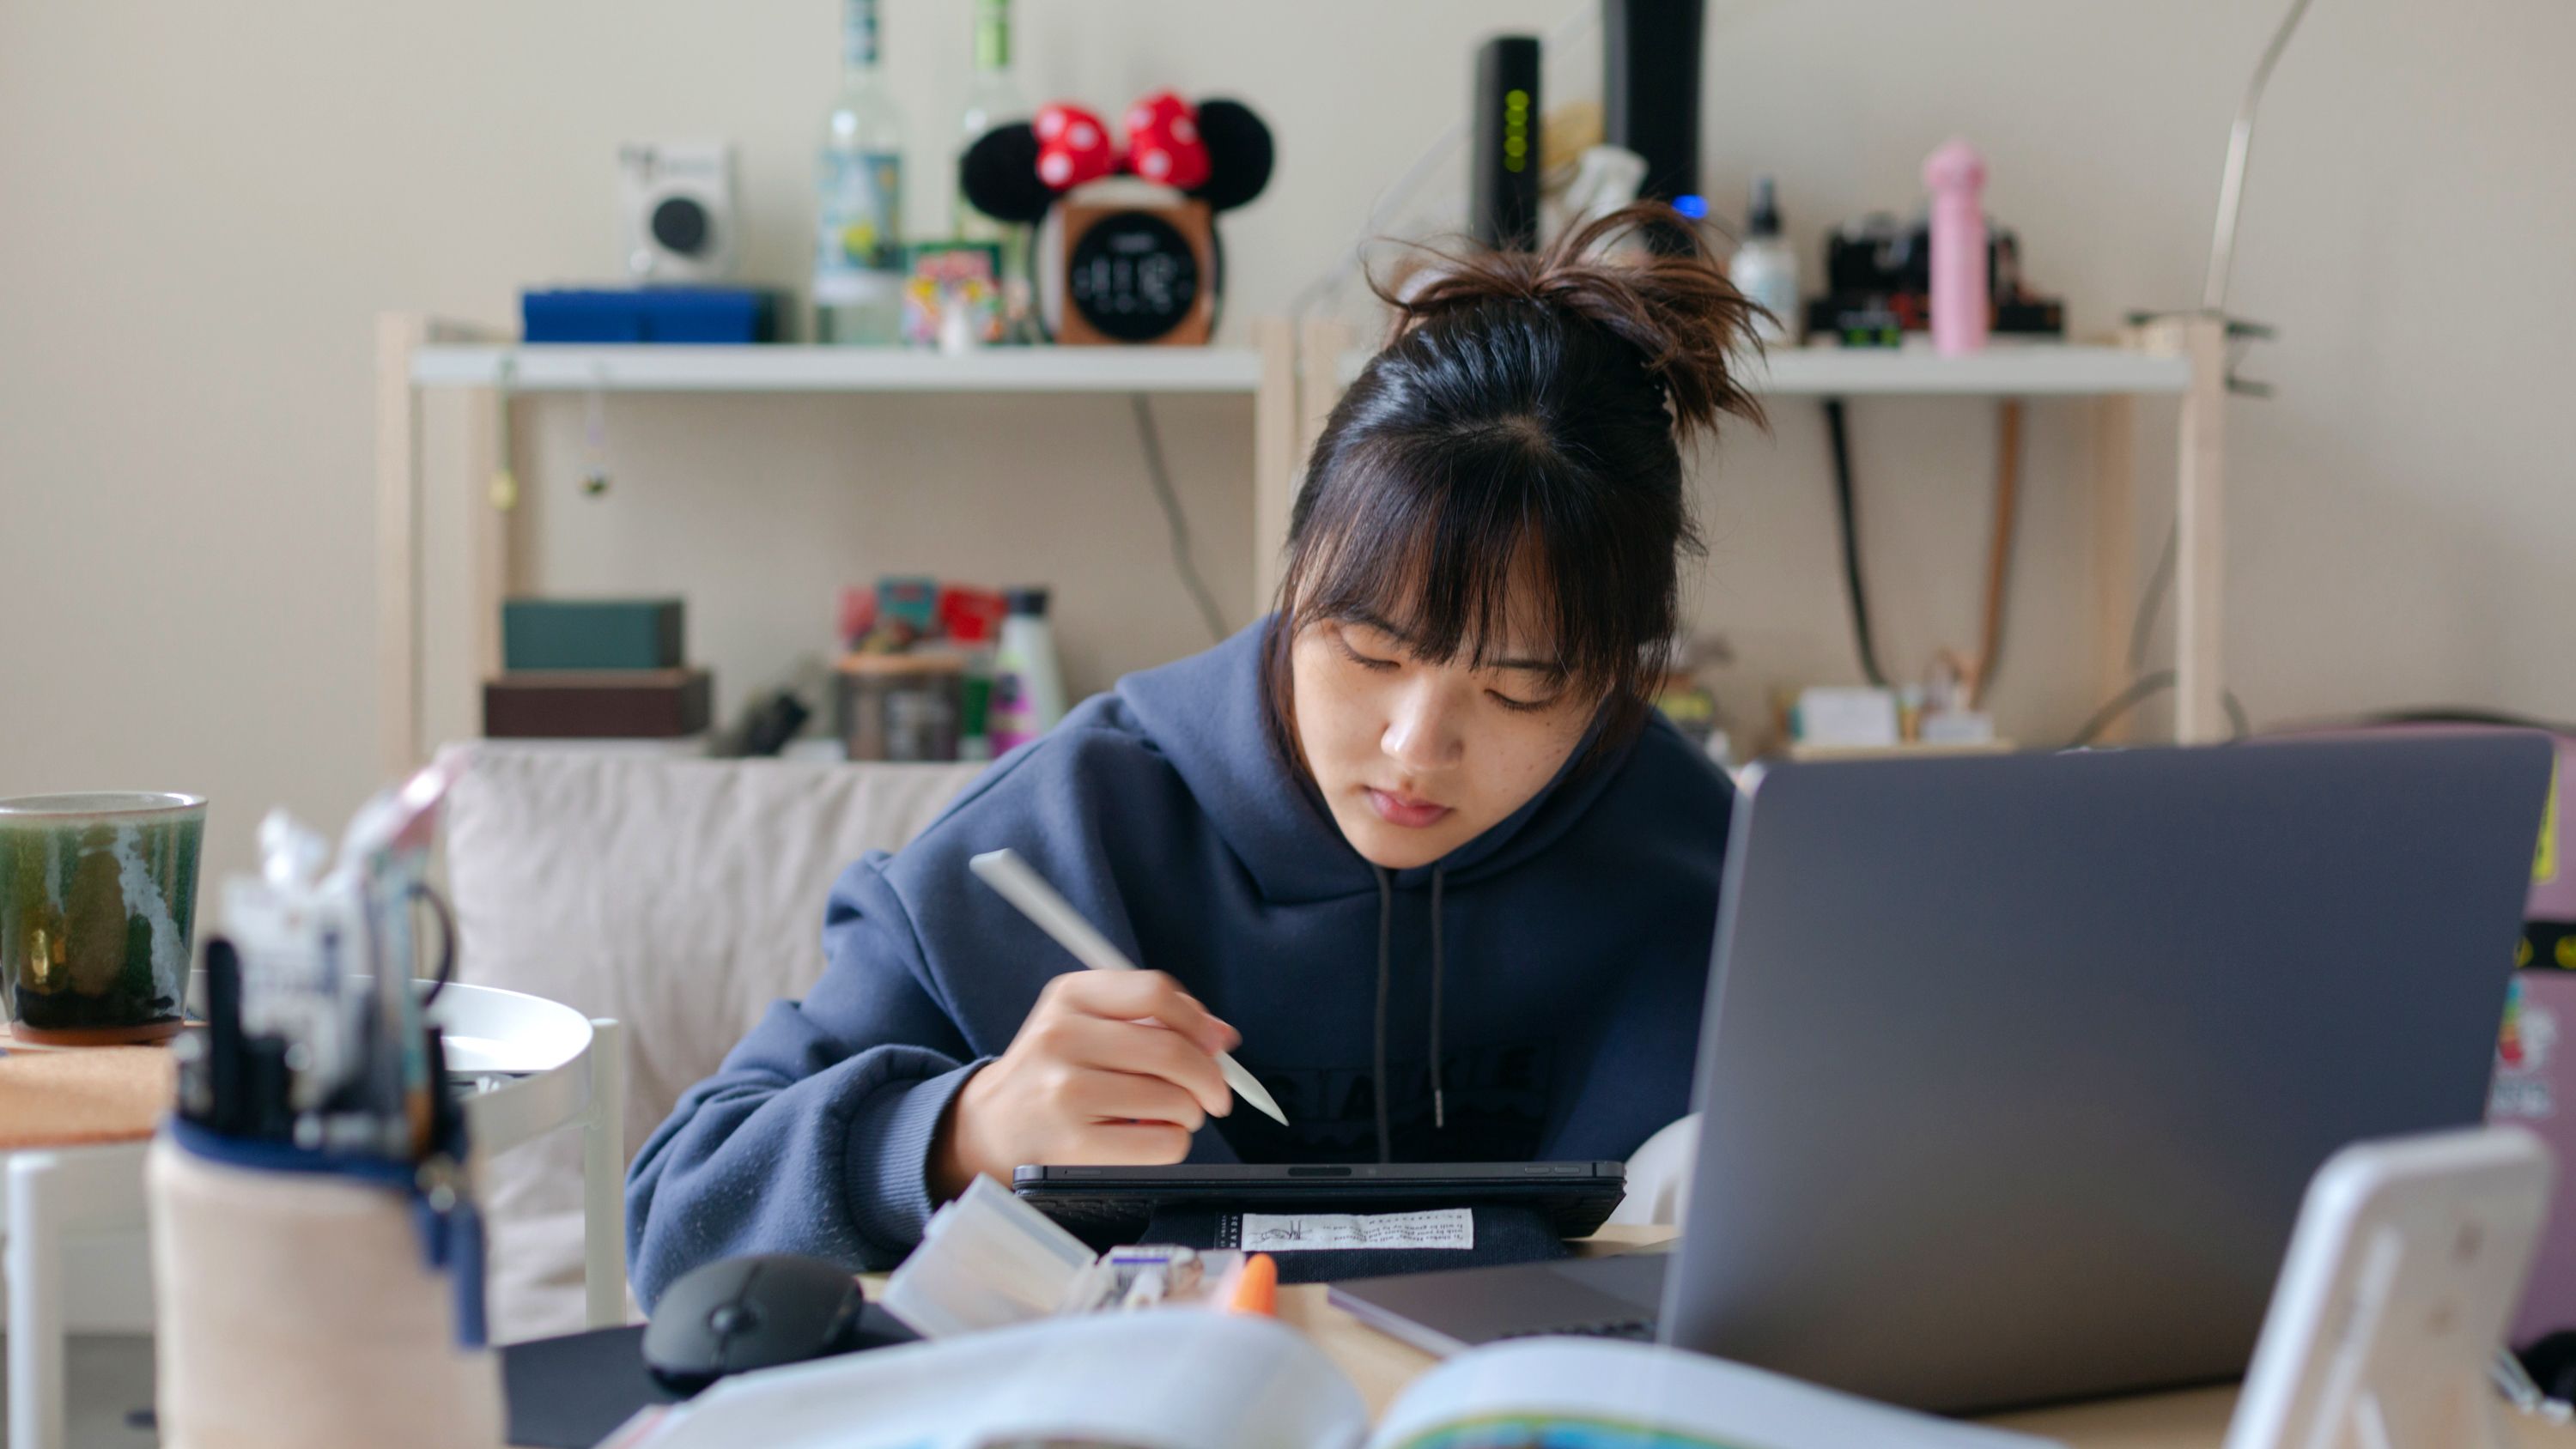 A young woman working on her laptop